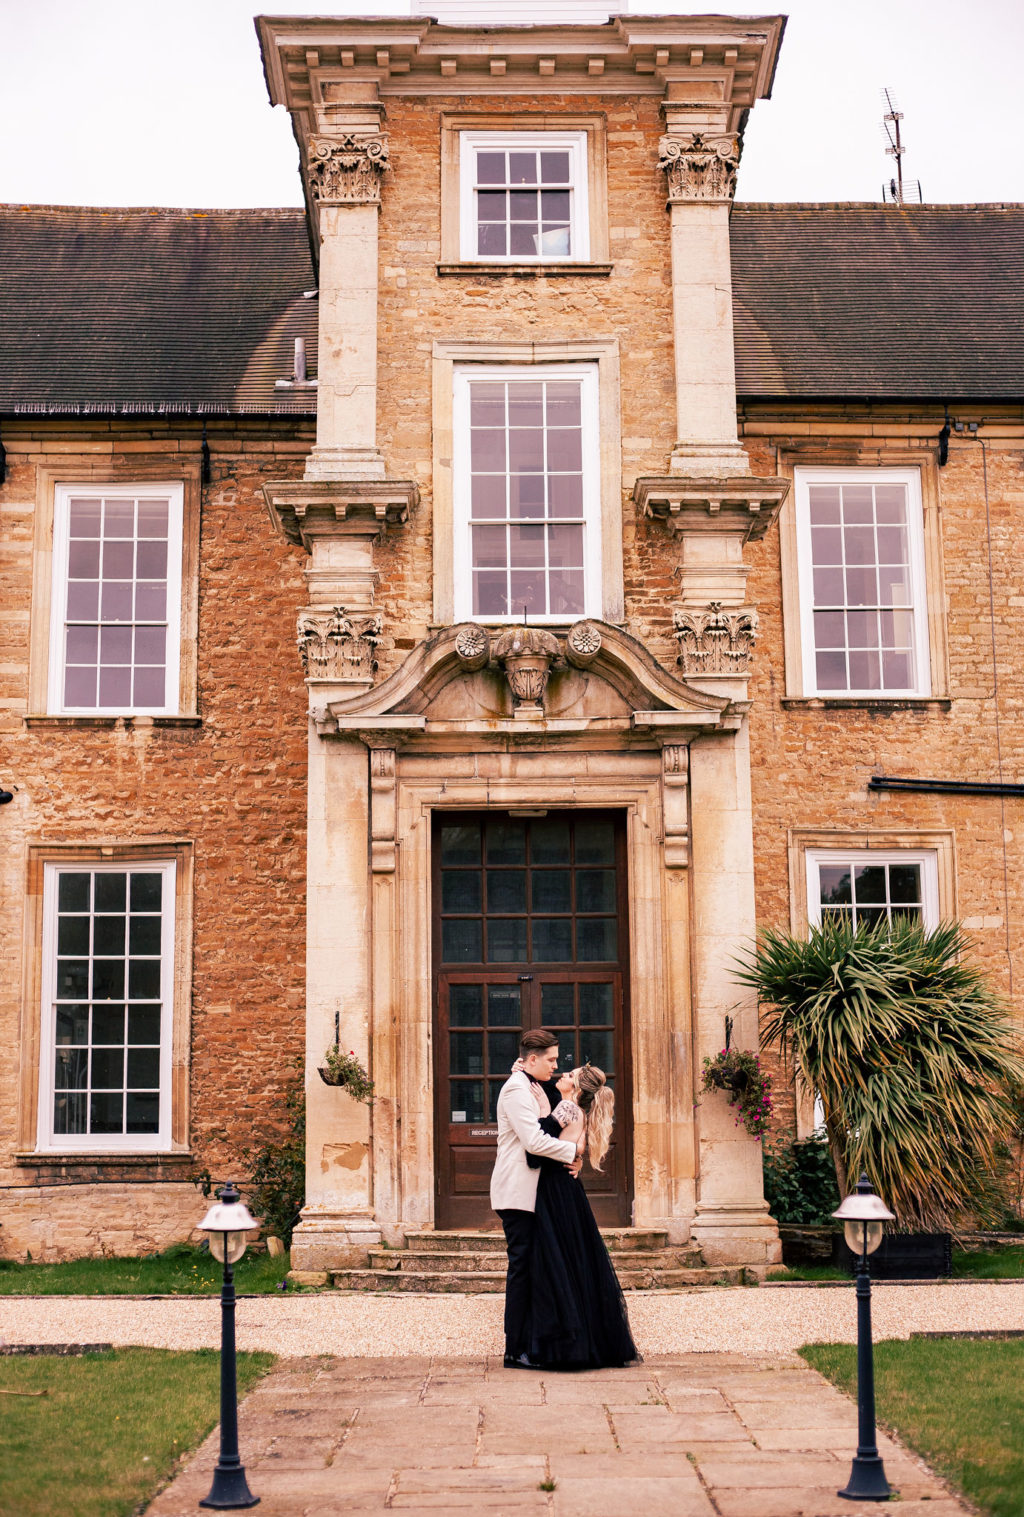 Eclectic Wedding Inspiration With Colour Pop Styling At Hinwick Hall Northamptonshire